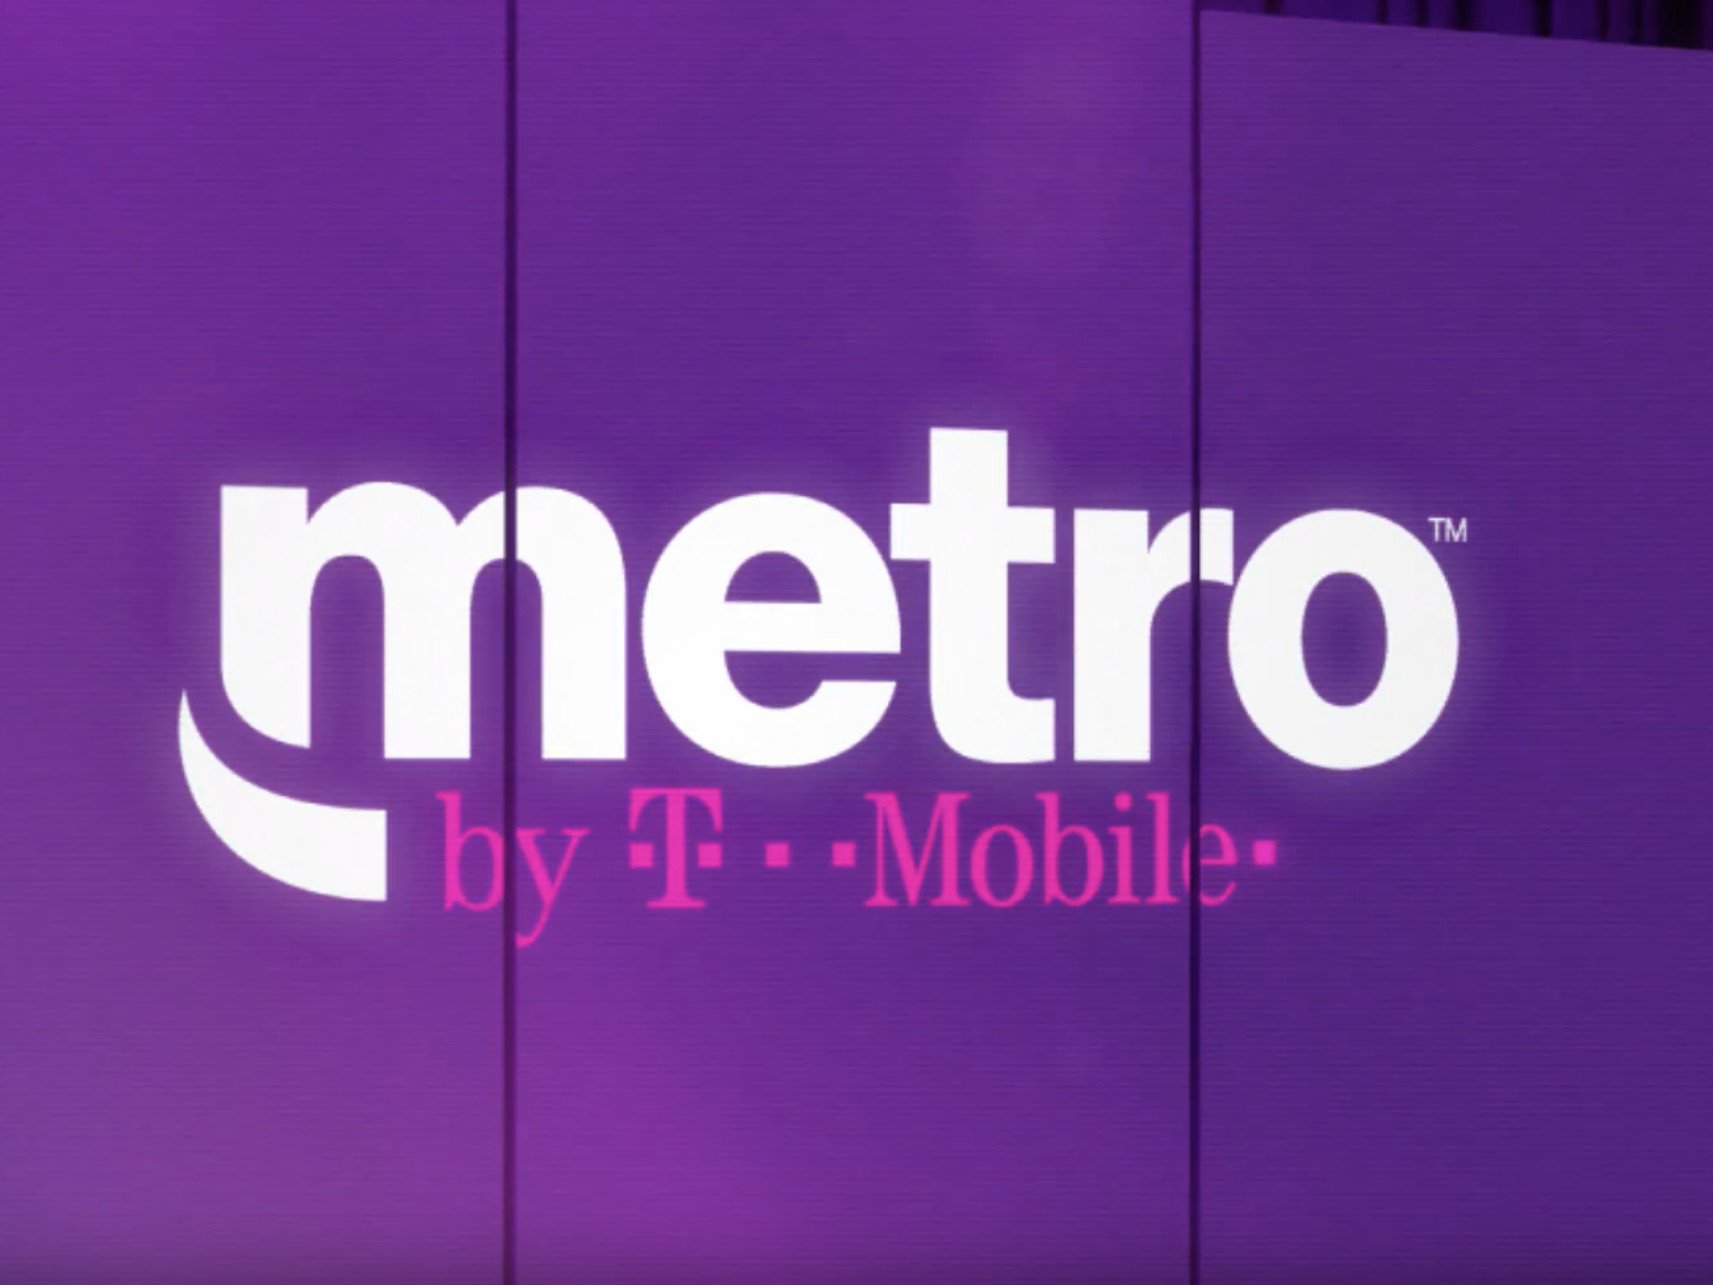 MetroPCS is now Metro by T-Mobile, new